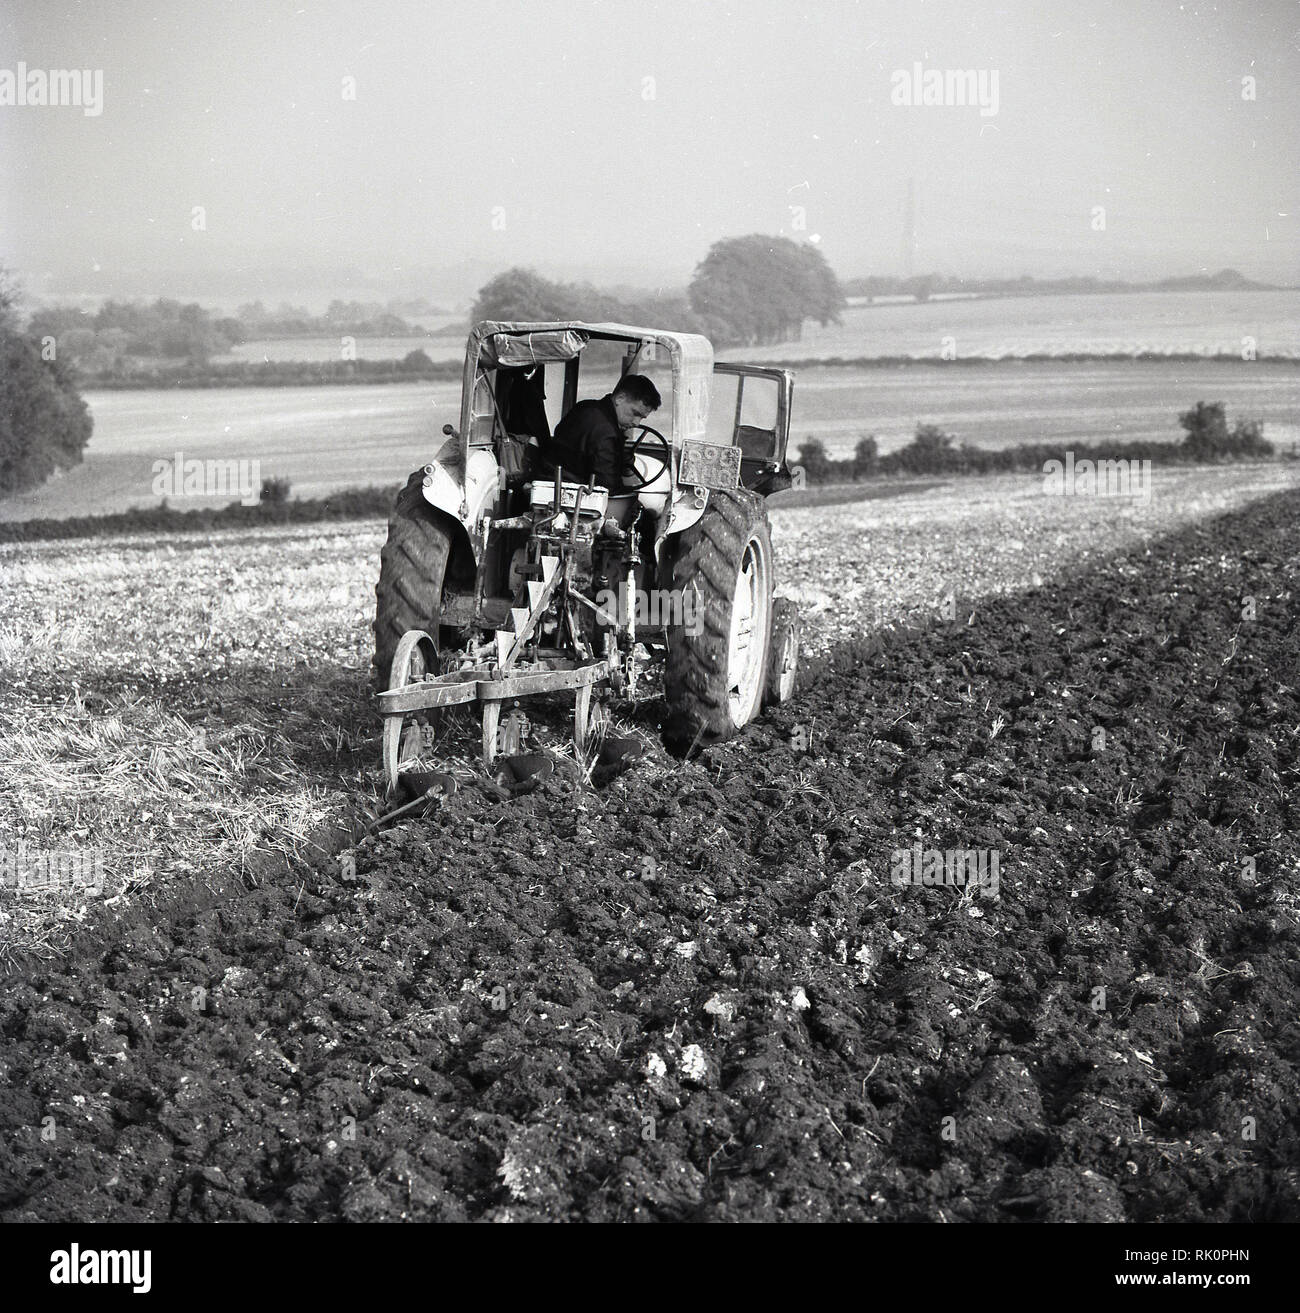 1950s, agriculture, a farmer on a tractor carefully ploughing a field, England, UK. Stock Photo